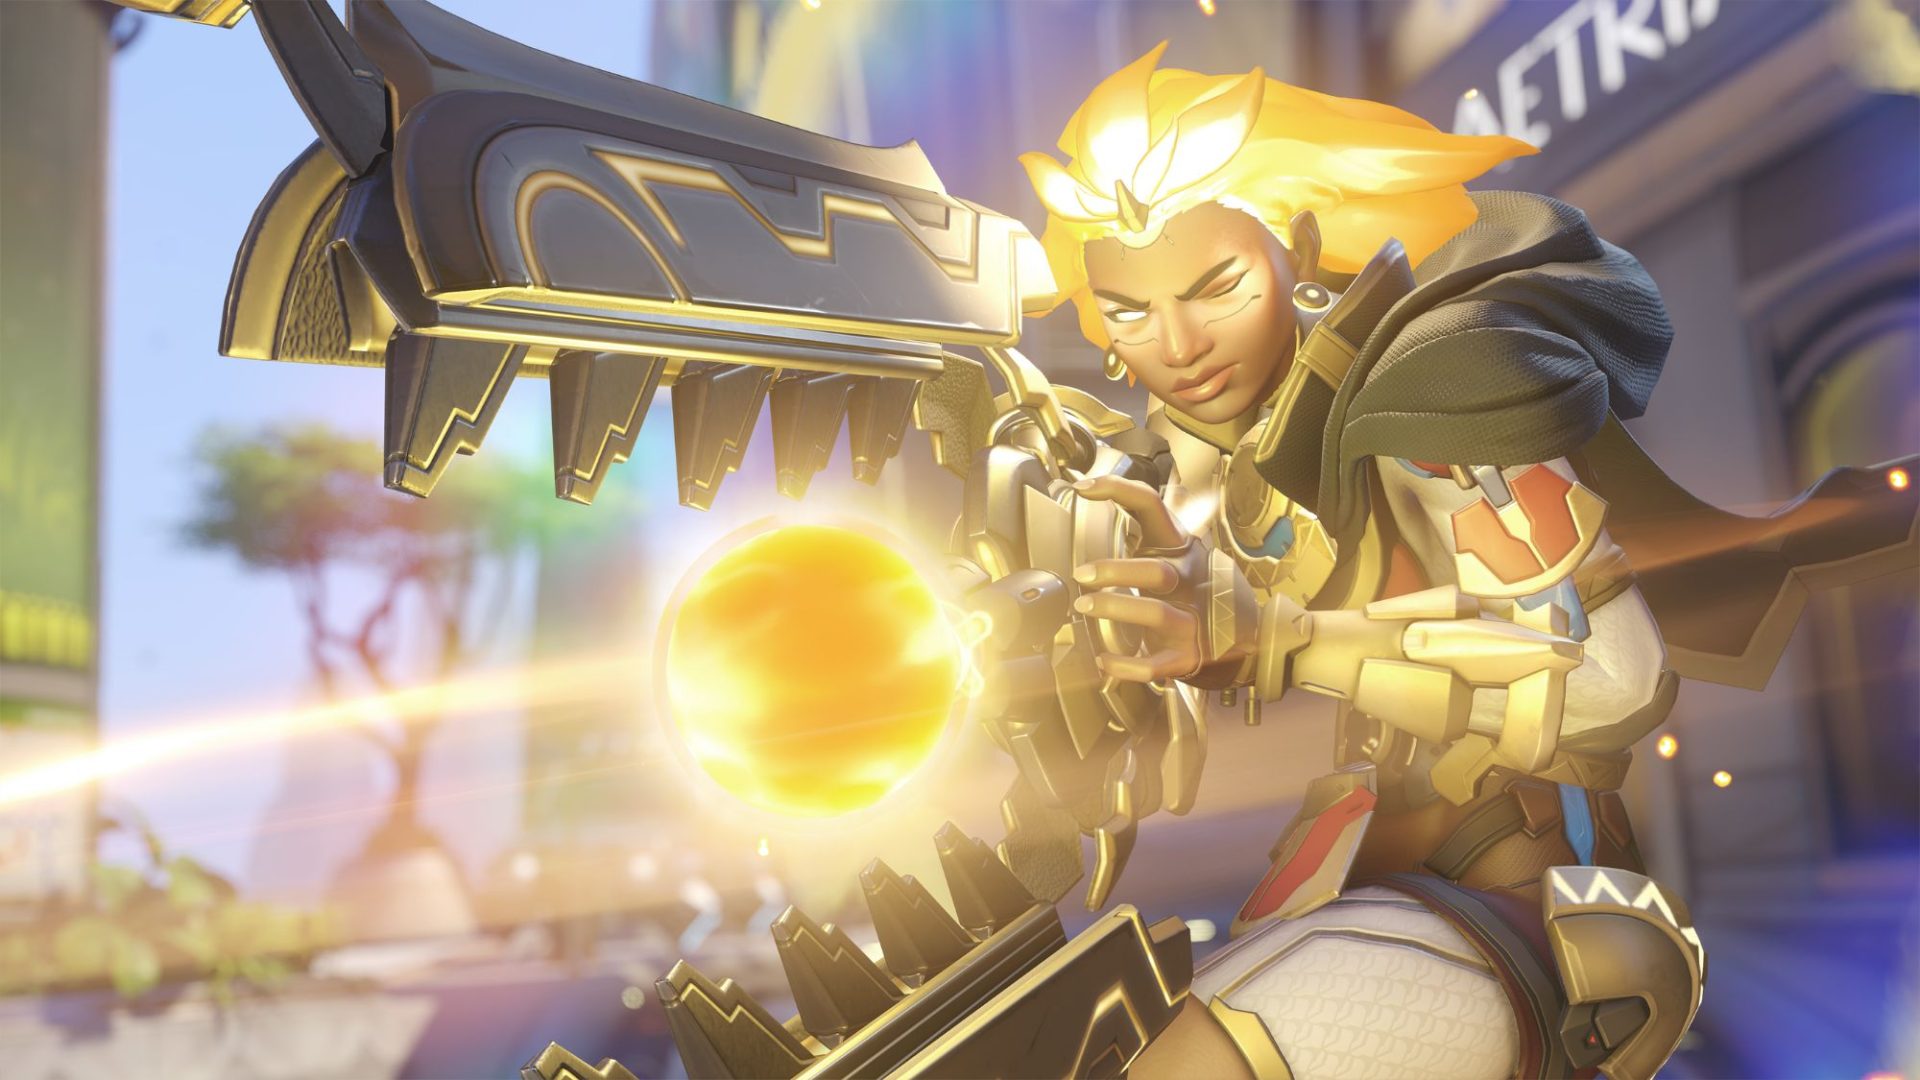 Overwatch 2 director says making all heroes free is ‘best for players’ and game